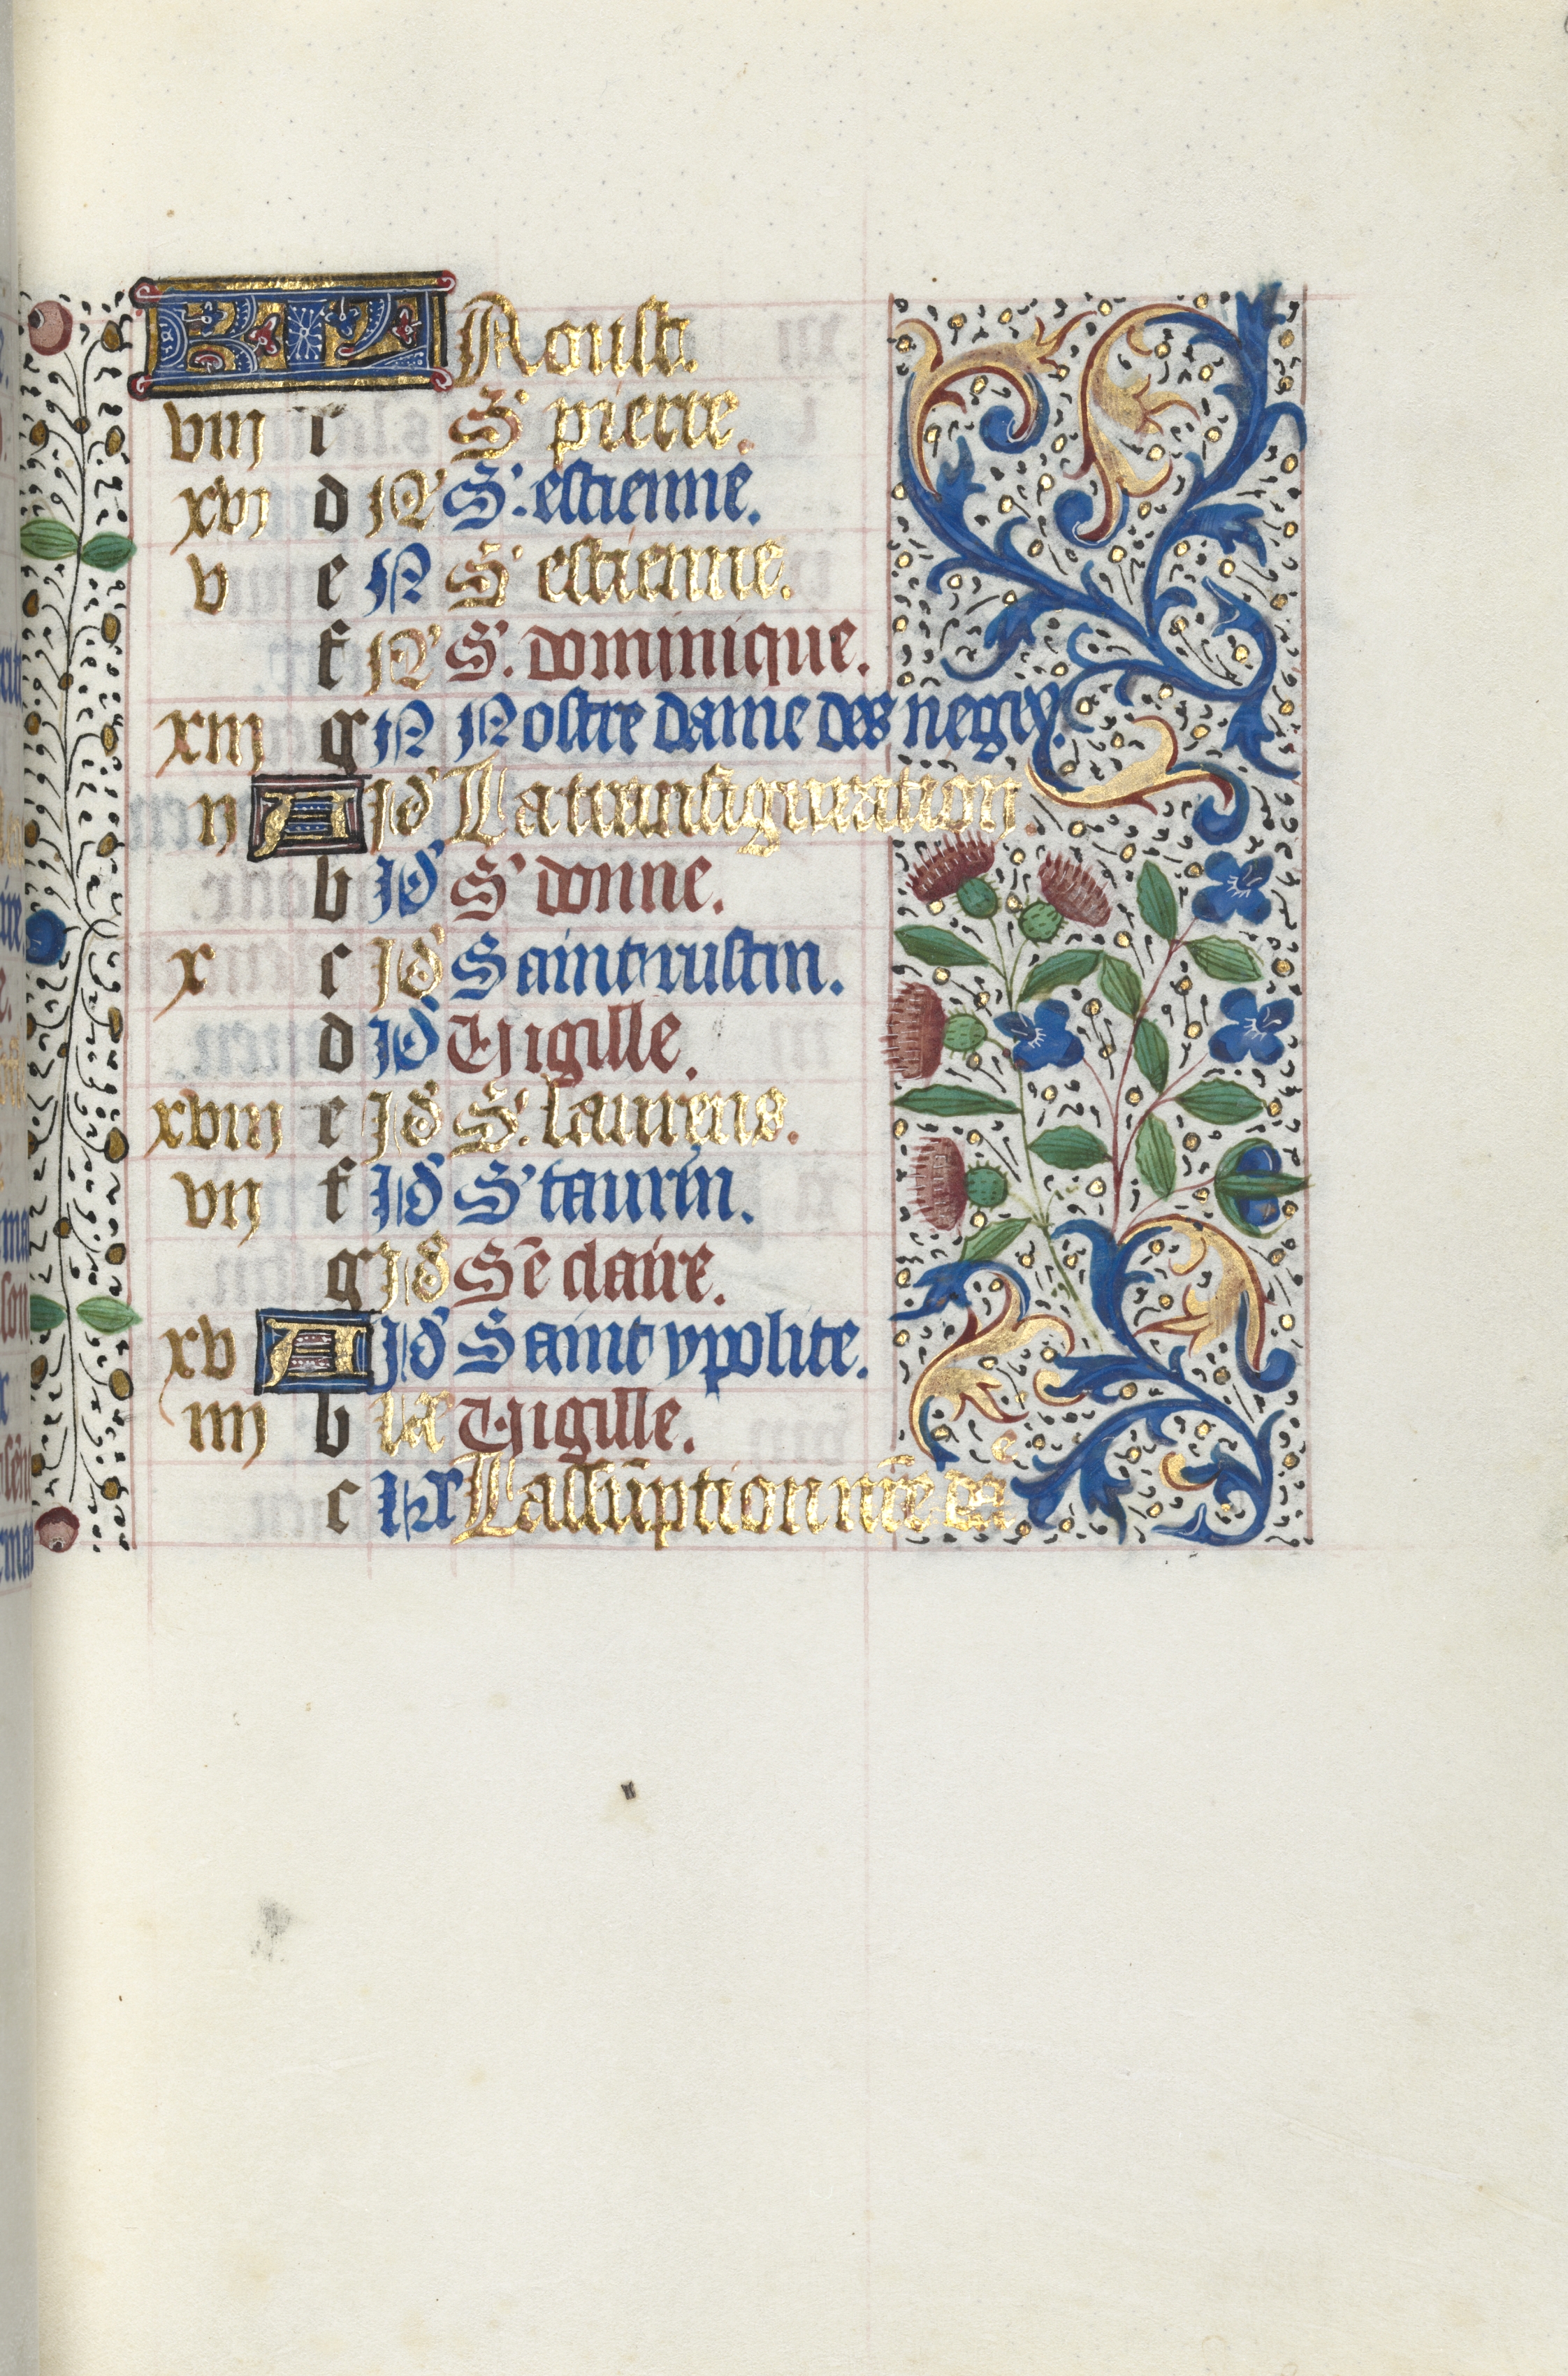 Book of Hours (Use of Rouen): fol. 8r, Calendar Page for August